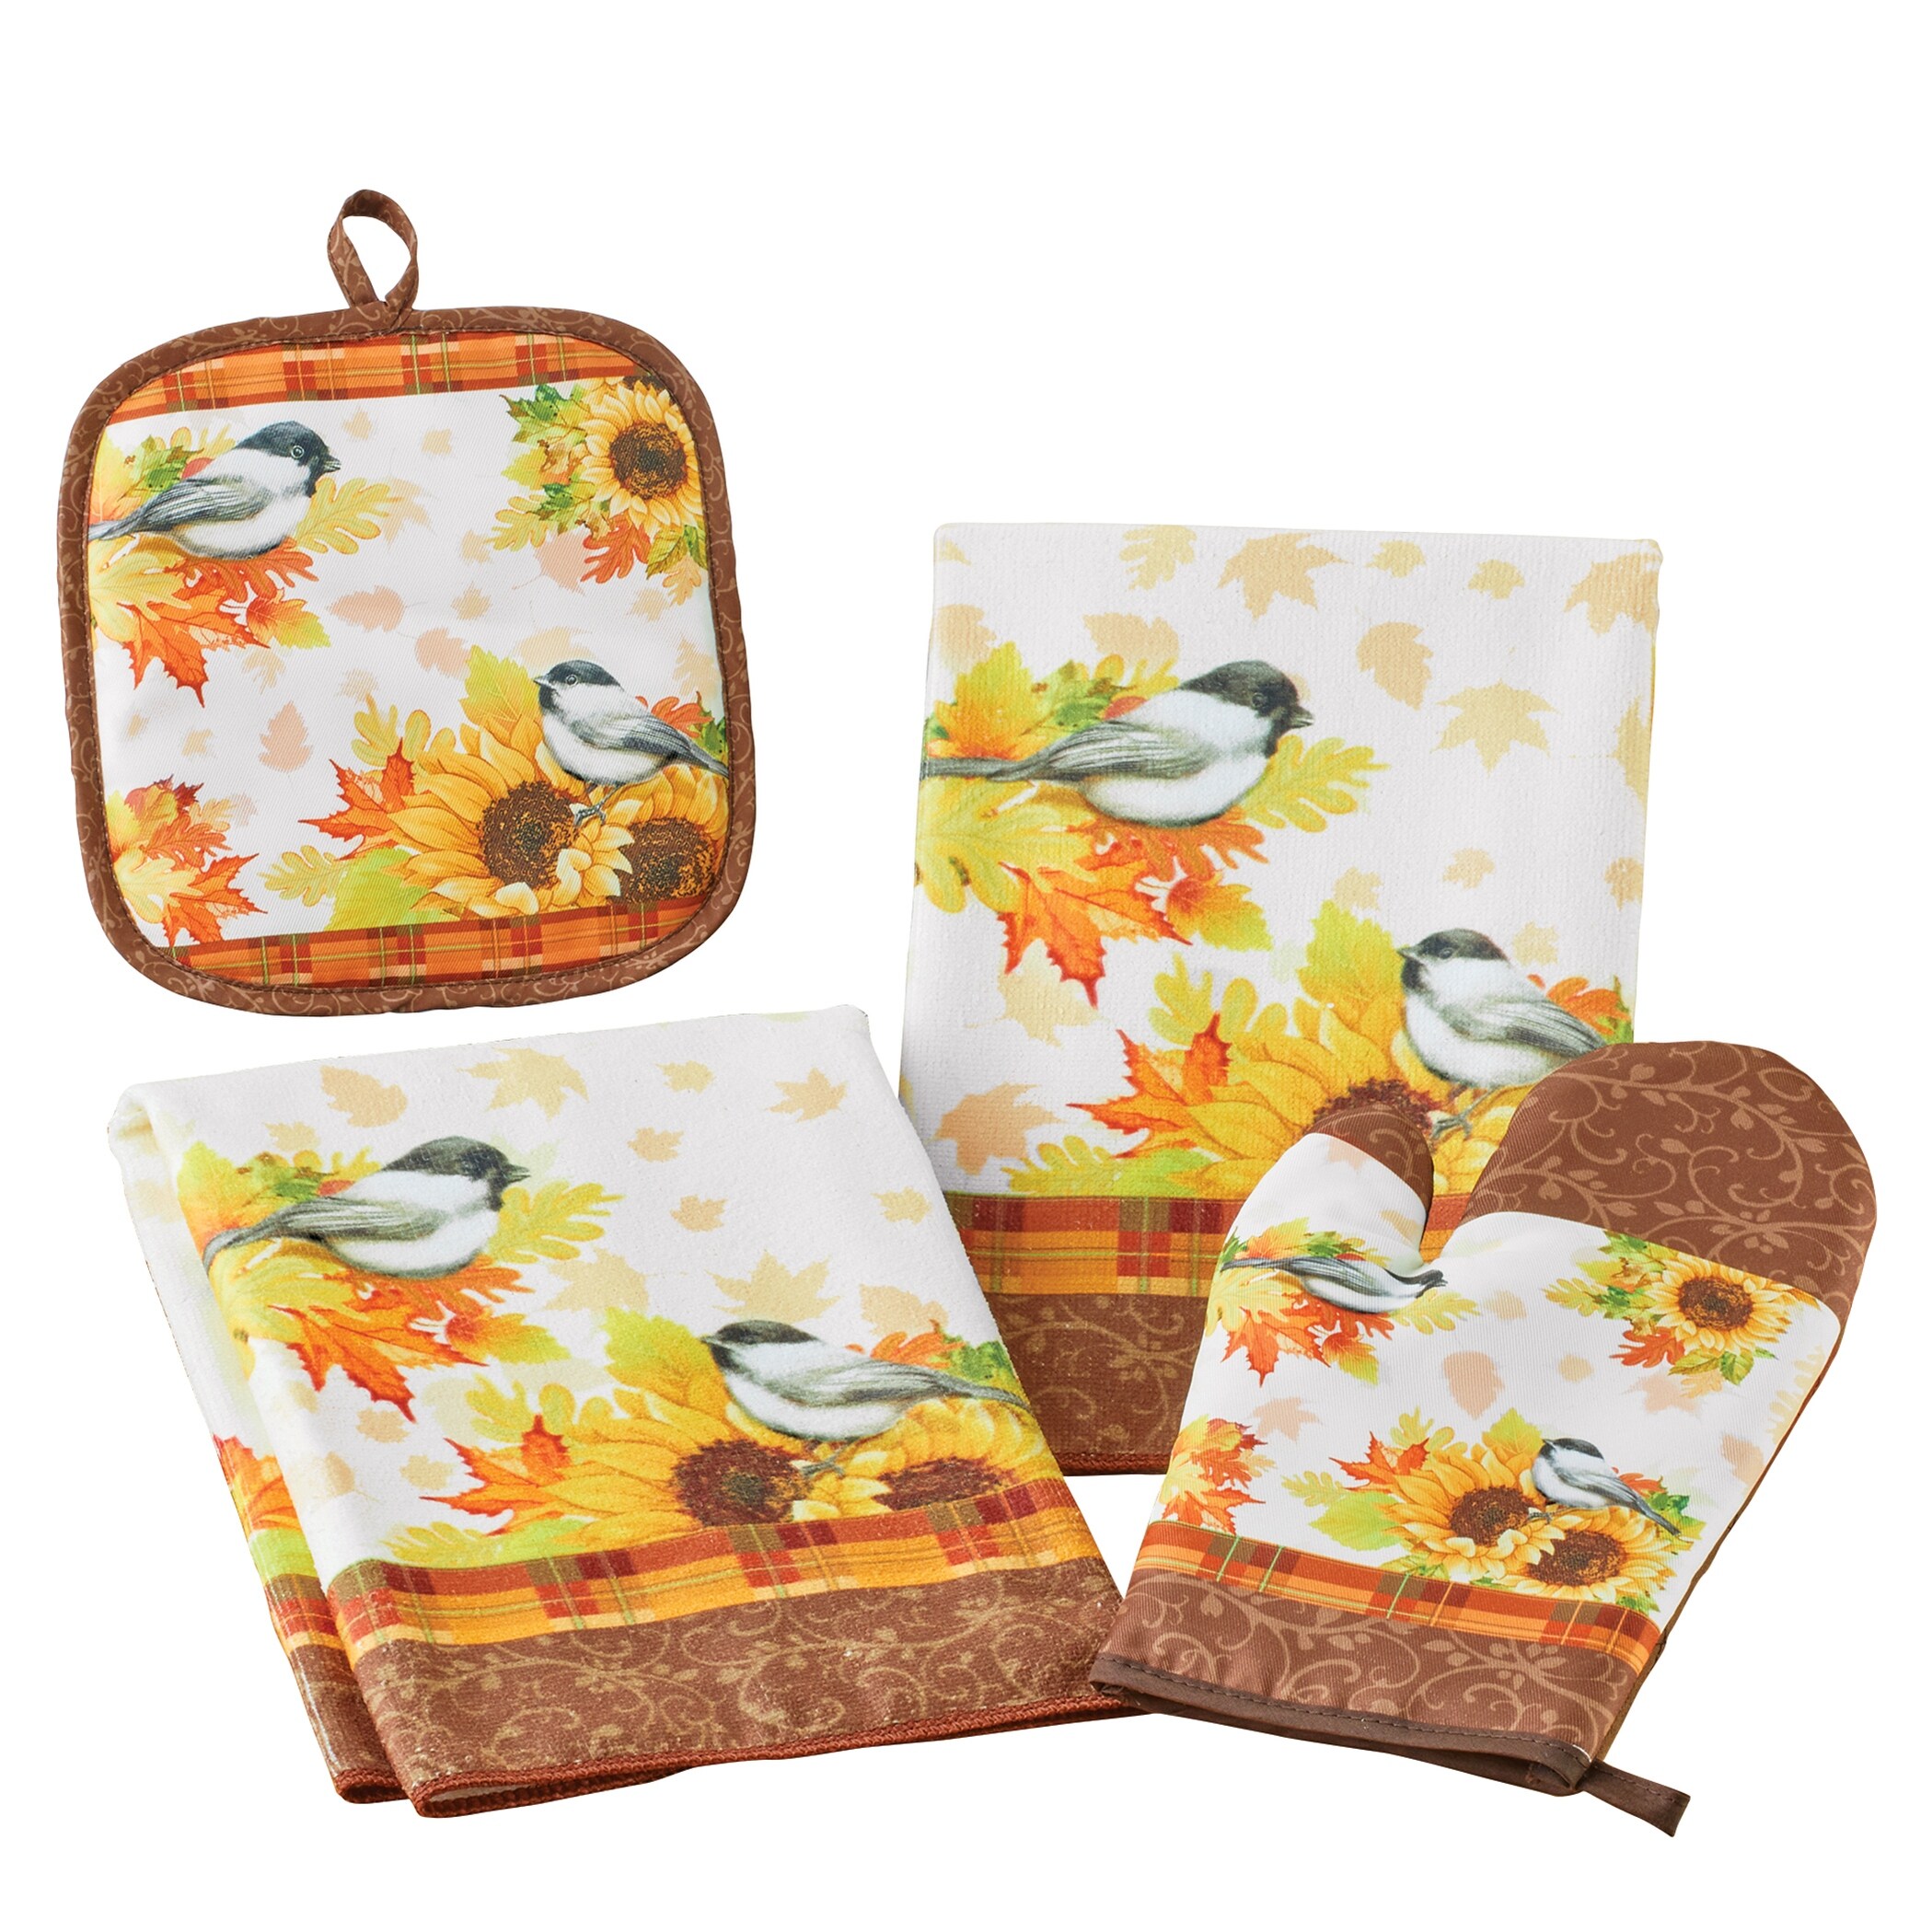 https://ak1.ostkcdn.com/images/products/is/images/direct/4759a0b01e7560d450f37424a93c478d442def03/Fall-Chickadee-and-Sunflower-4-Piece-Kitchen-Set.jpg